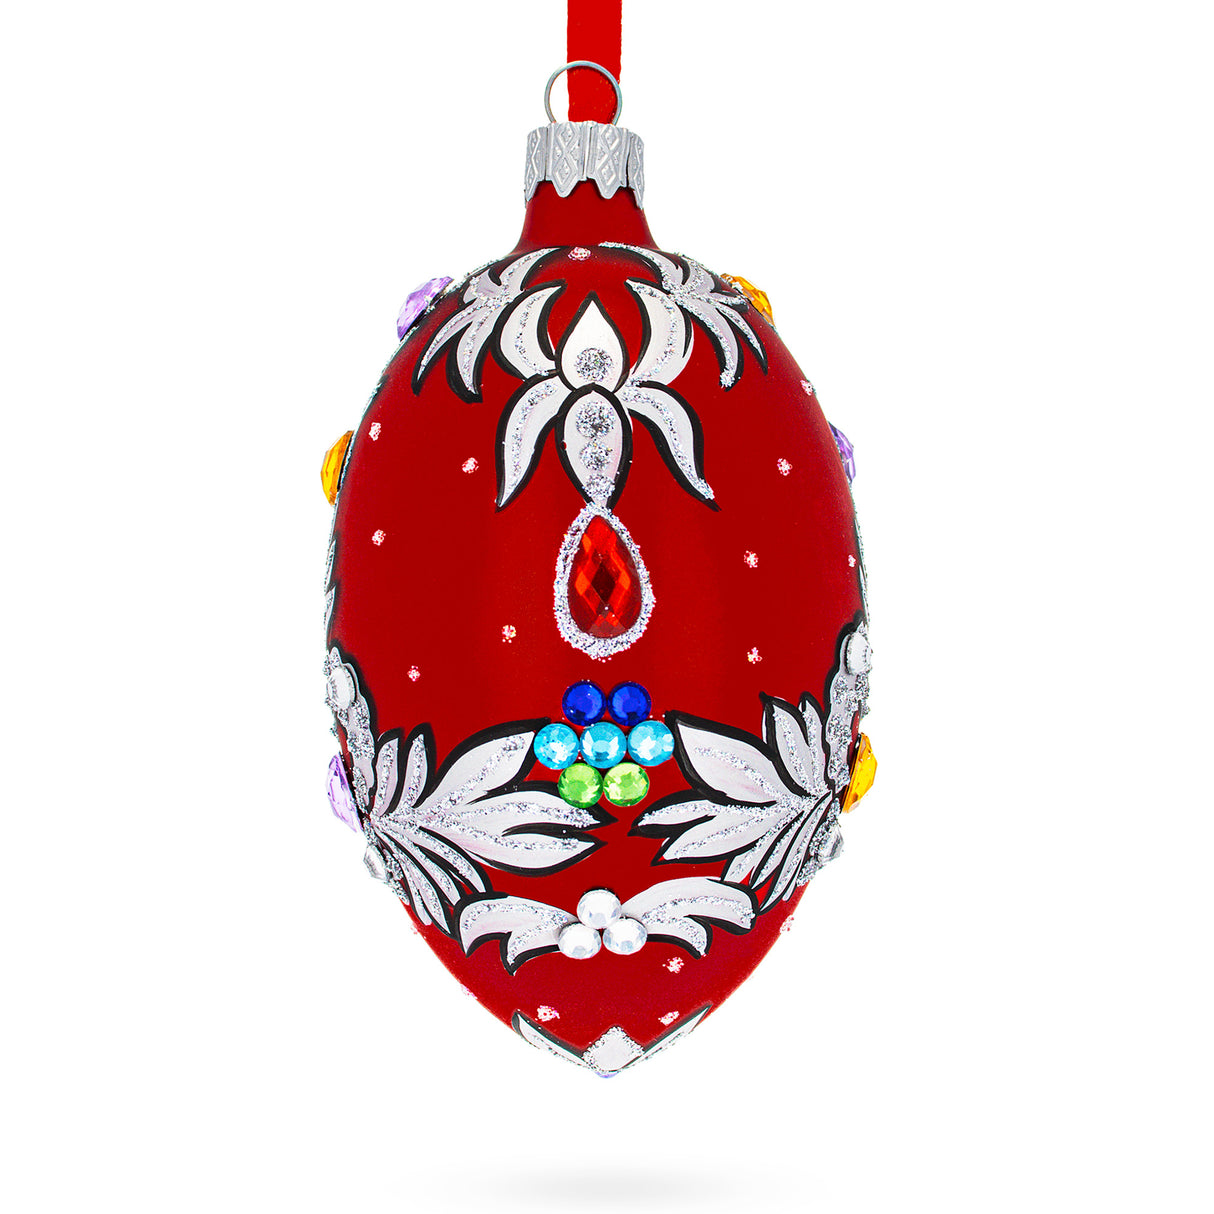 Florence Designer Jeweled Pendant Necklace Glass Egg Christmas Ornament 4 Inches in Red color, Oval shape